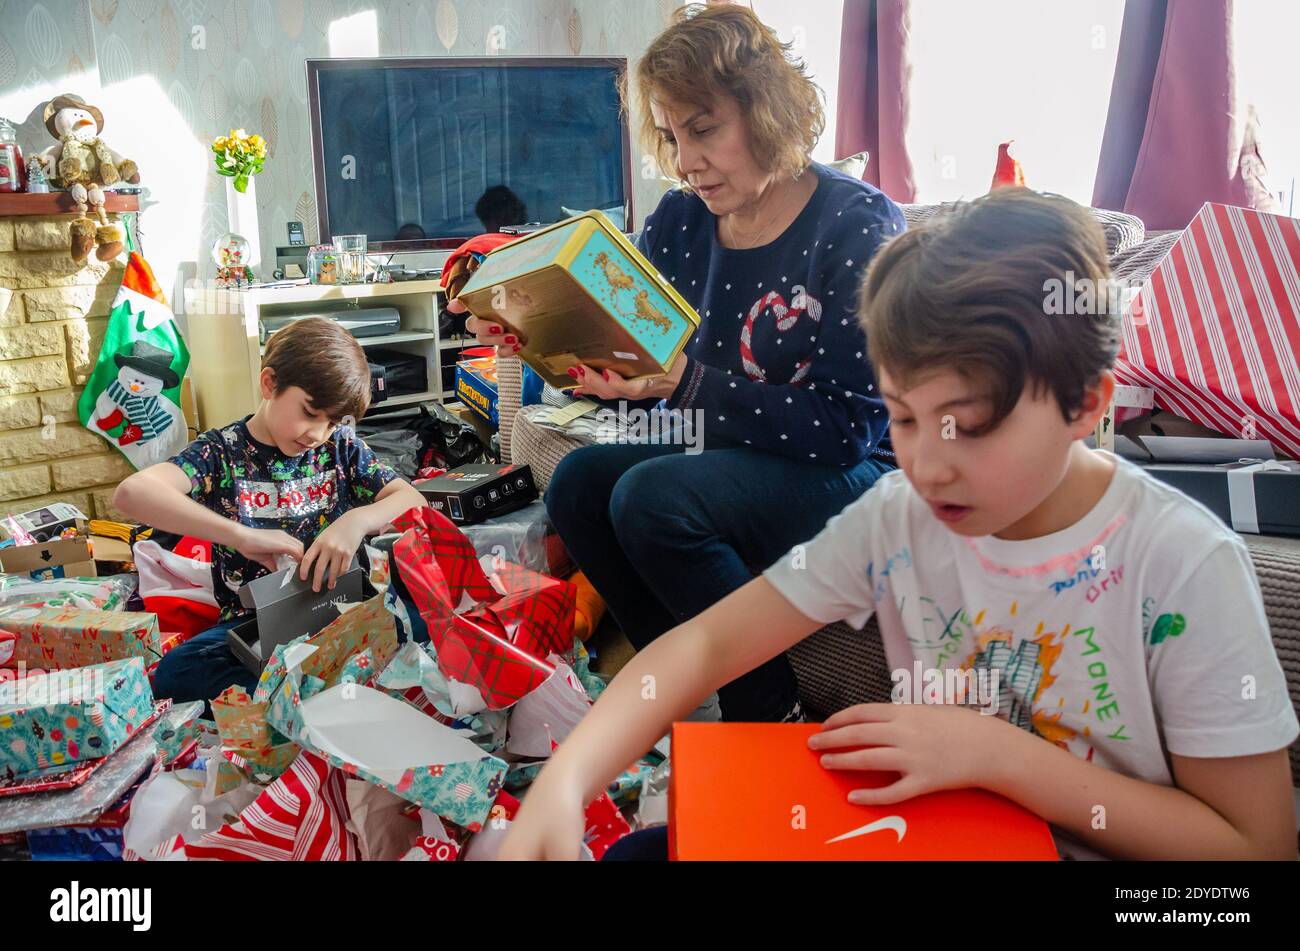 A family excitedly open Christmas presents together at home on Christmas day. Stock Photo